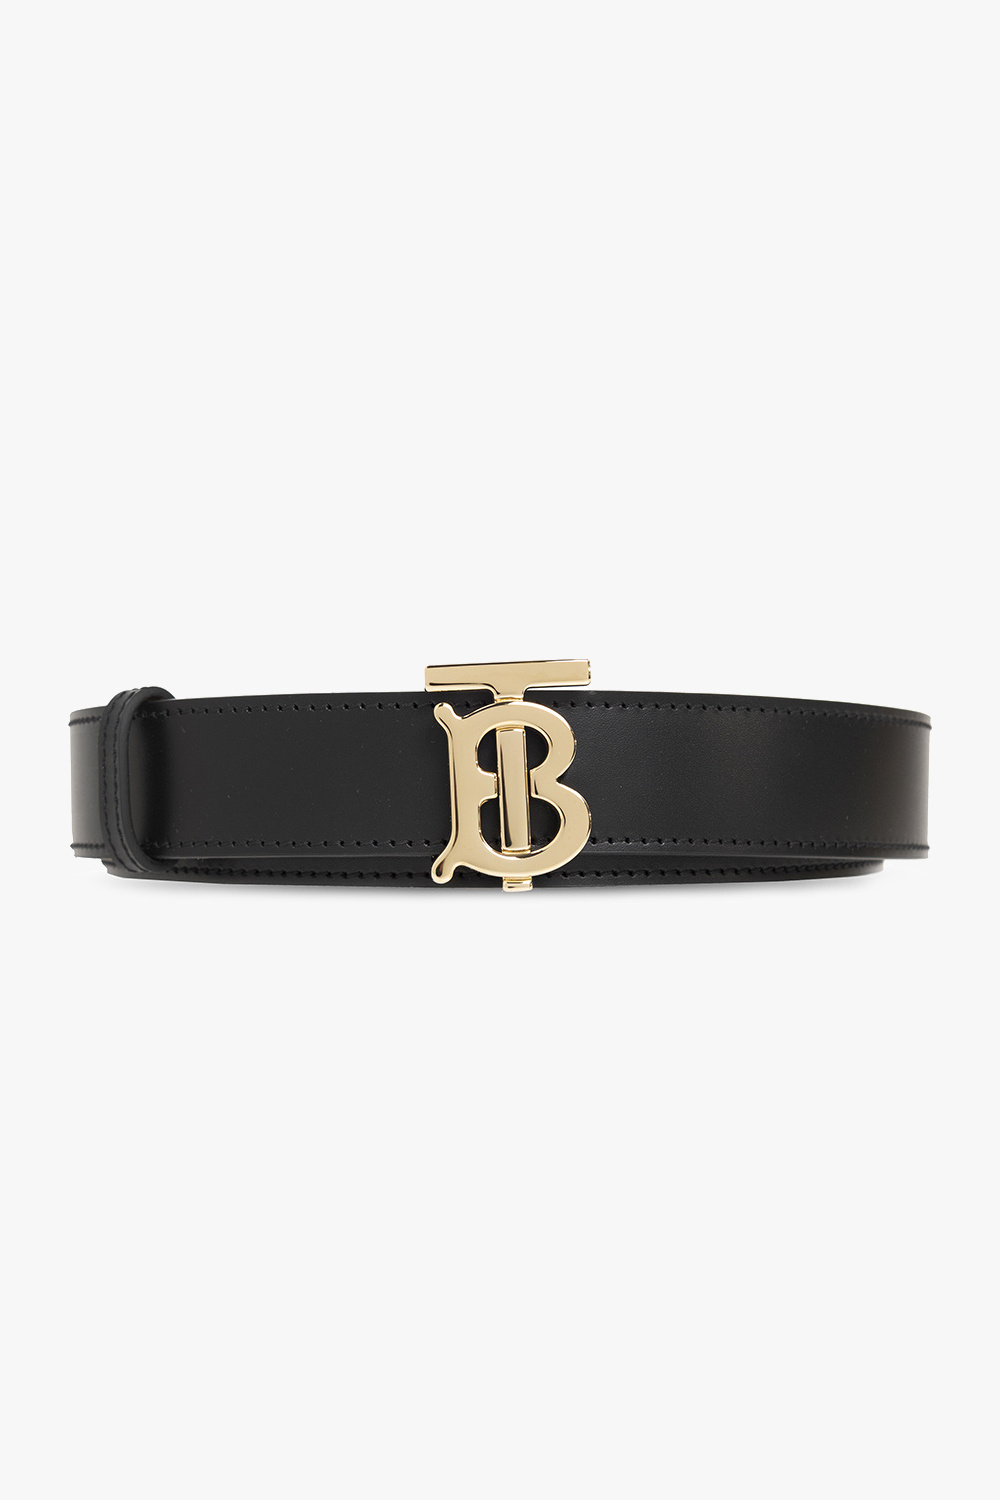 Burberry Leather Reversible TB Belt , Size: 85